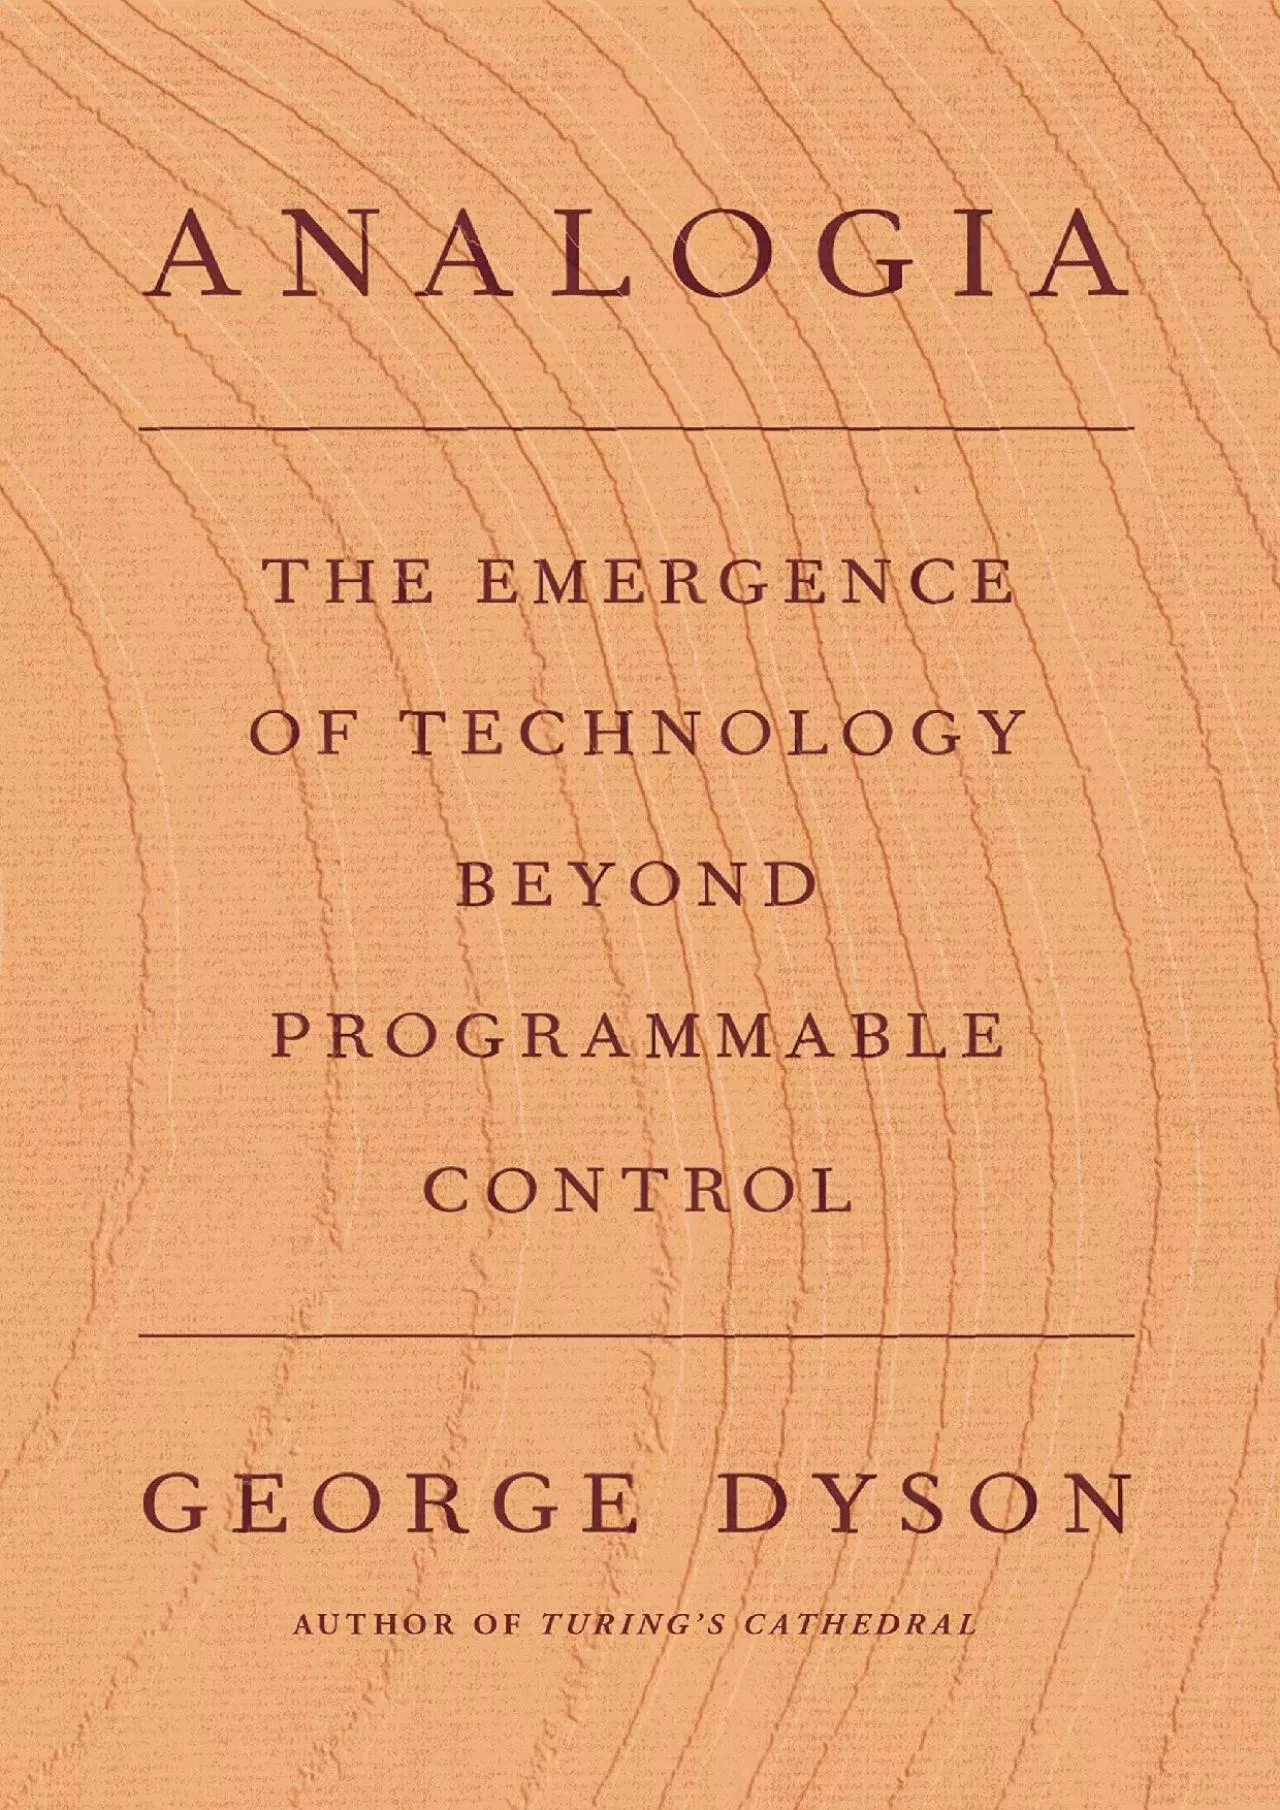 [DOWNLOAD]-Analogia: The Emergence of Technology Beyond Programmable Control